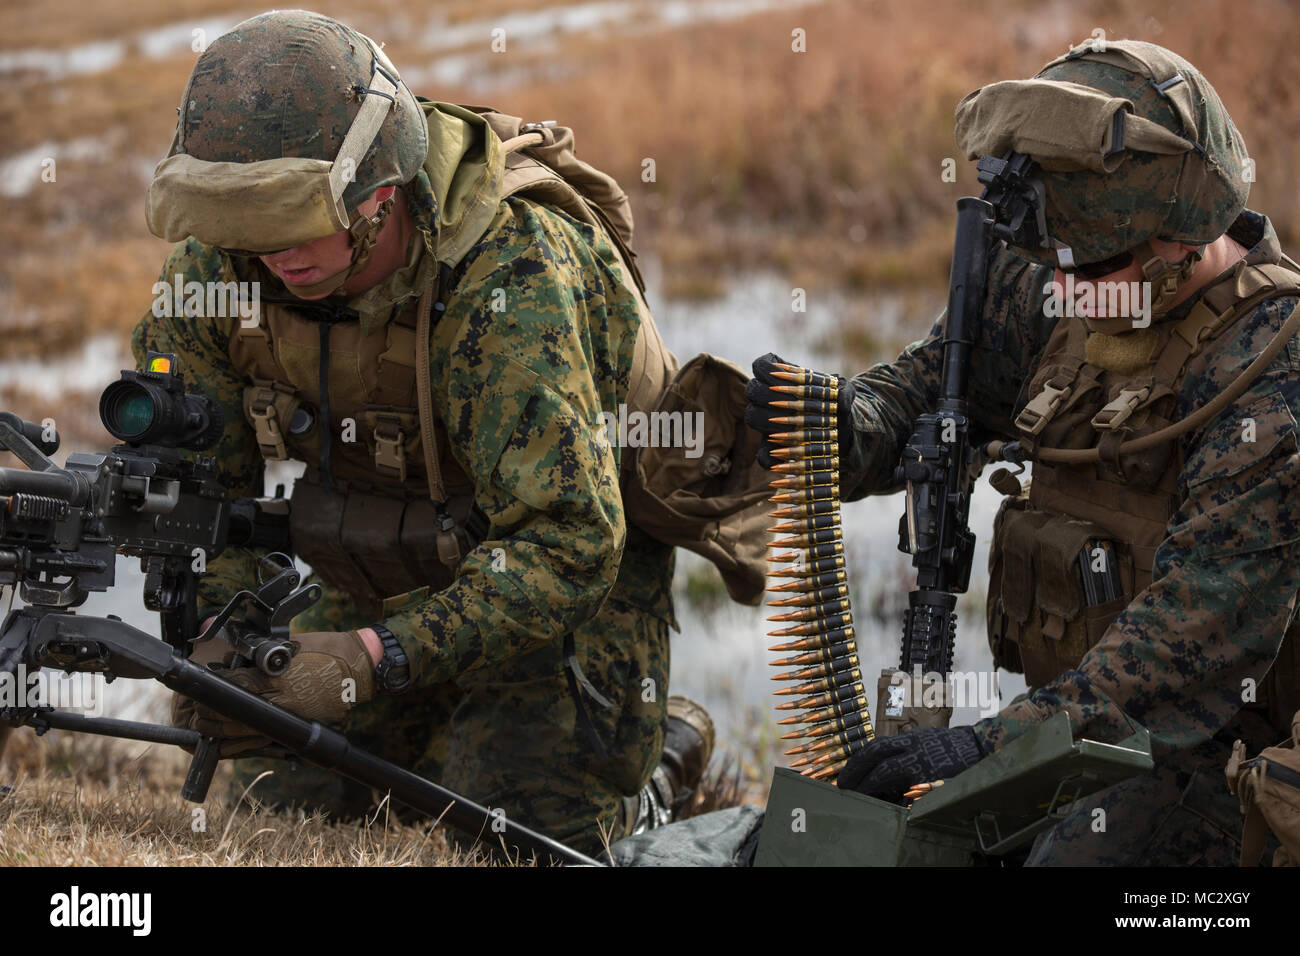 Marines with 1st Battalion, 2nd Marine Regiment, 2nd Marine Division, prepare a M240 machine gun at a platoon live-fire range during a training exercise at Camp Lejeune, N.C., Jan. 23, 2018. The training is meant to maintain proficiency at the squad and platoon-level of warfighting by patrolling, breaching obstacles, and conducting live-fire movements to take an objective. (U.S. Marine Corps photo by Lance Cpl. Ashley McLaughlin) Stock Photo